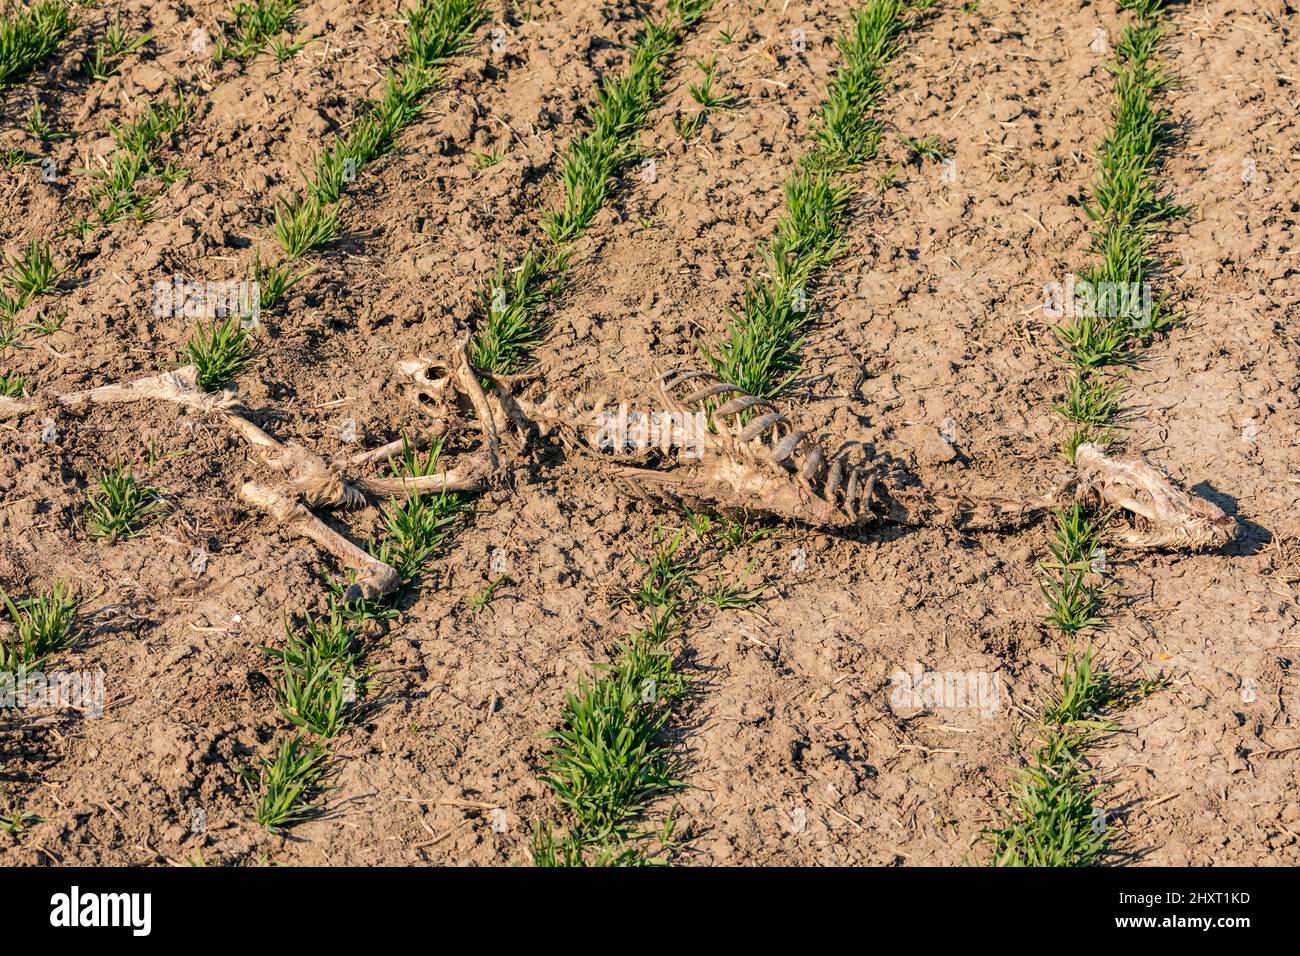 A skeleton of a large dead deer or mammal in a field of plants in winter Stock Photo